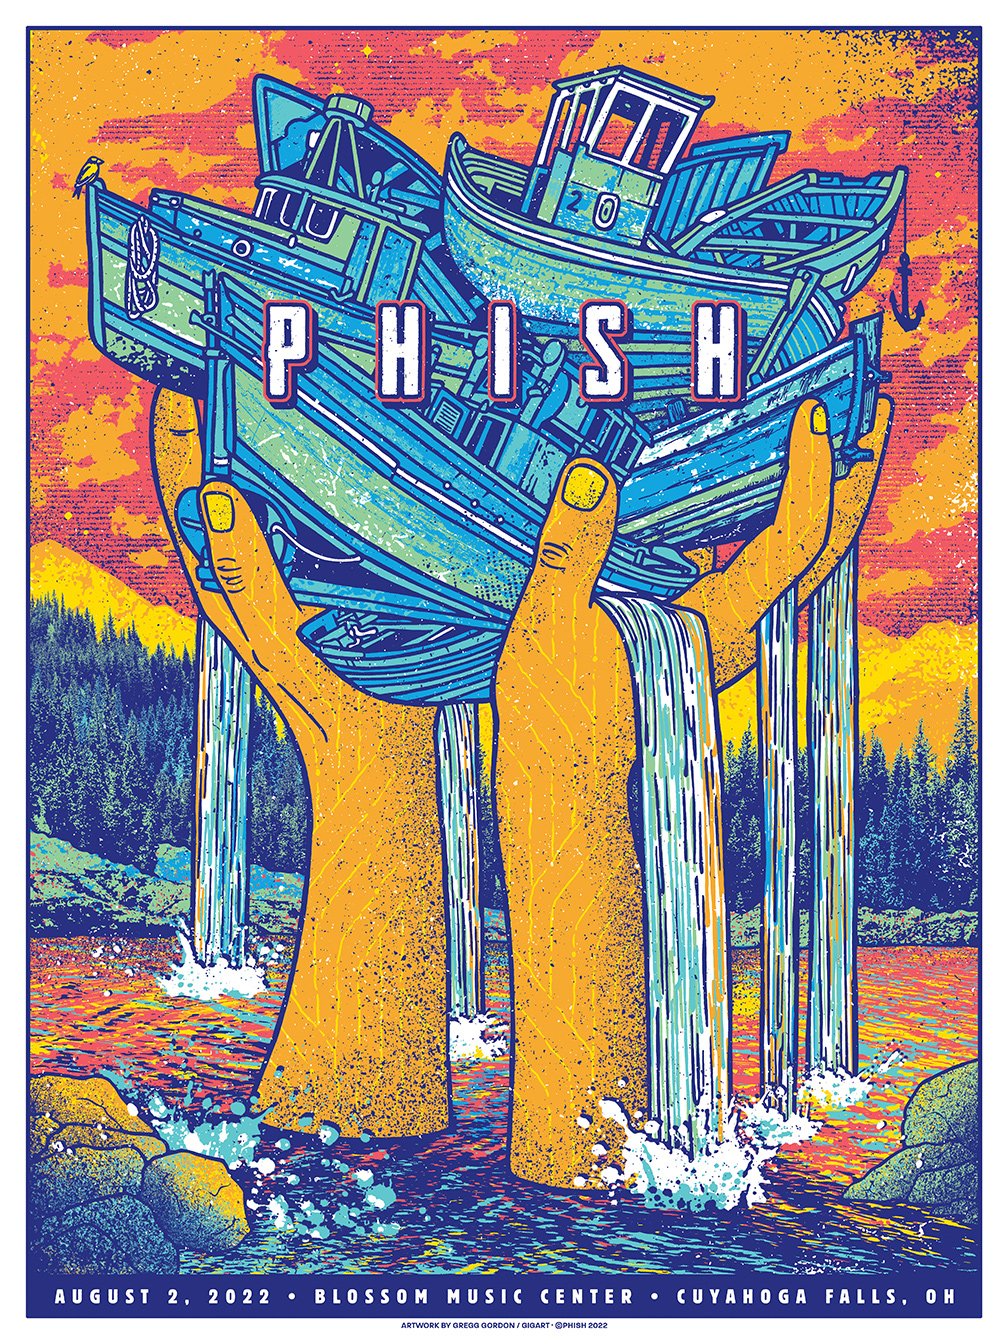 Phish Brings Summer 2022 Tour to Blossom Music Center in Cuyahoga Falls